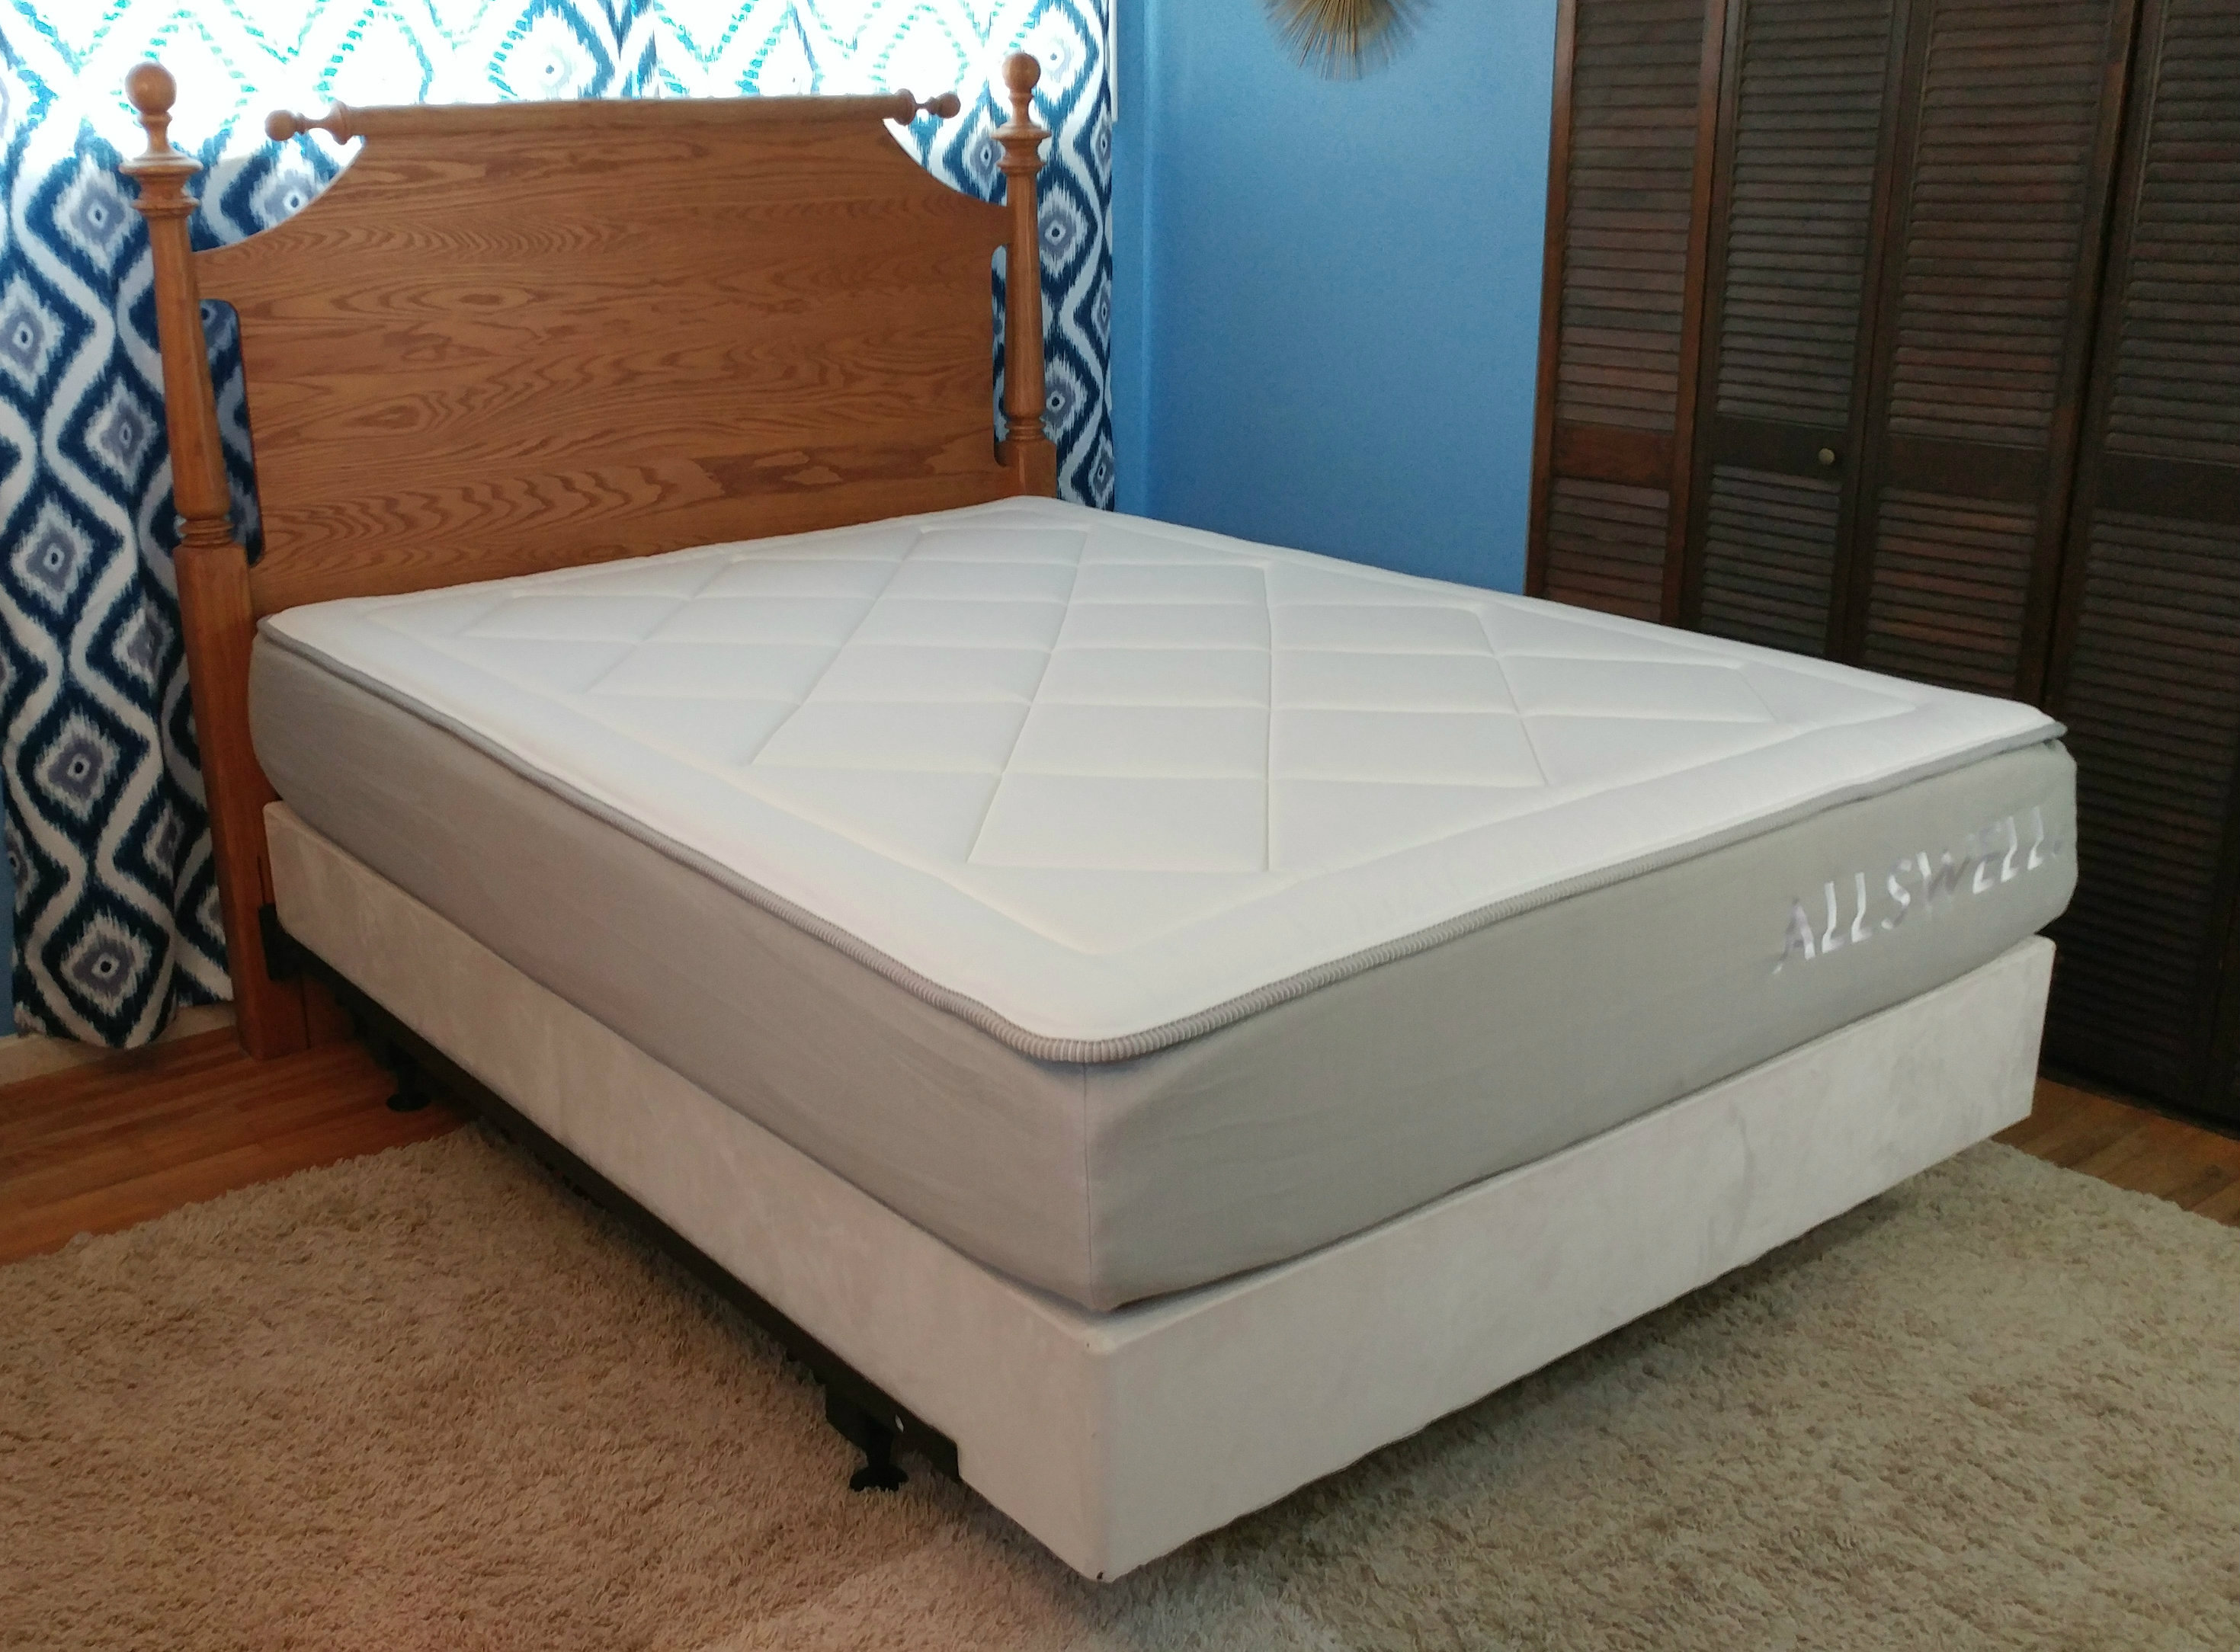 review of allswell mattresses